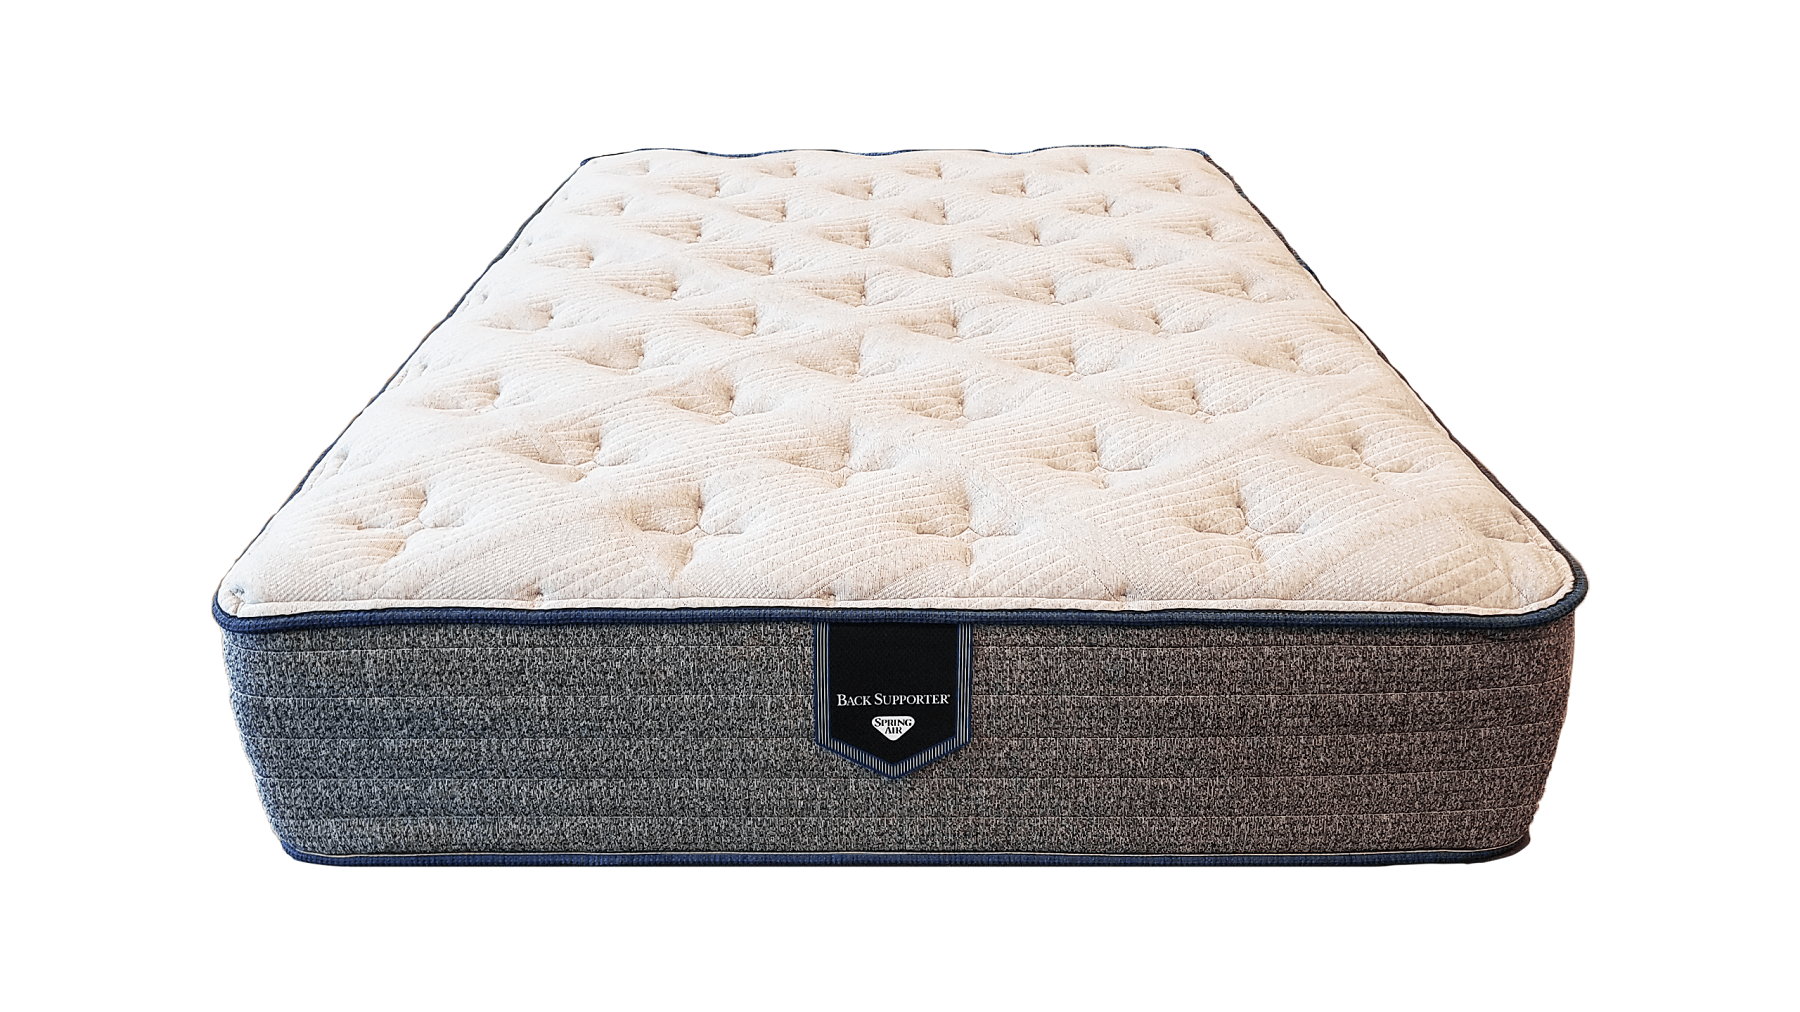 spring air back supporter mattress prices